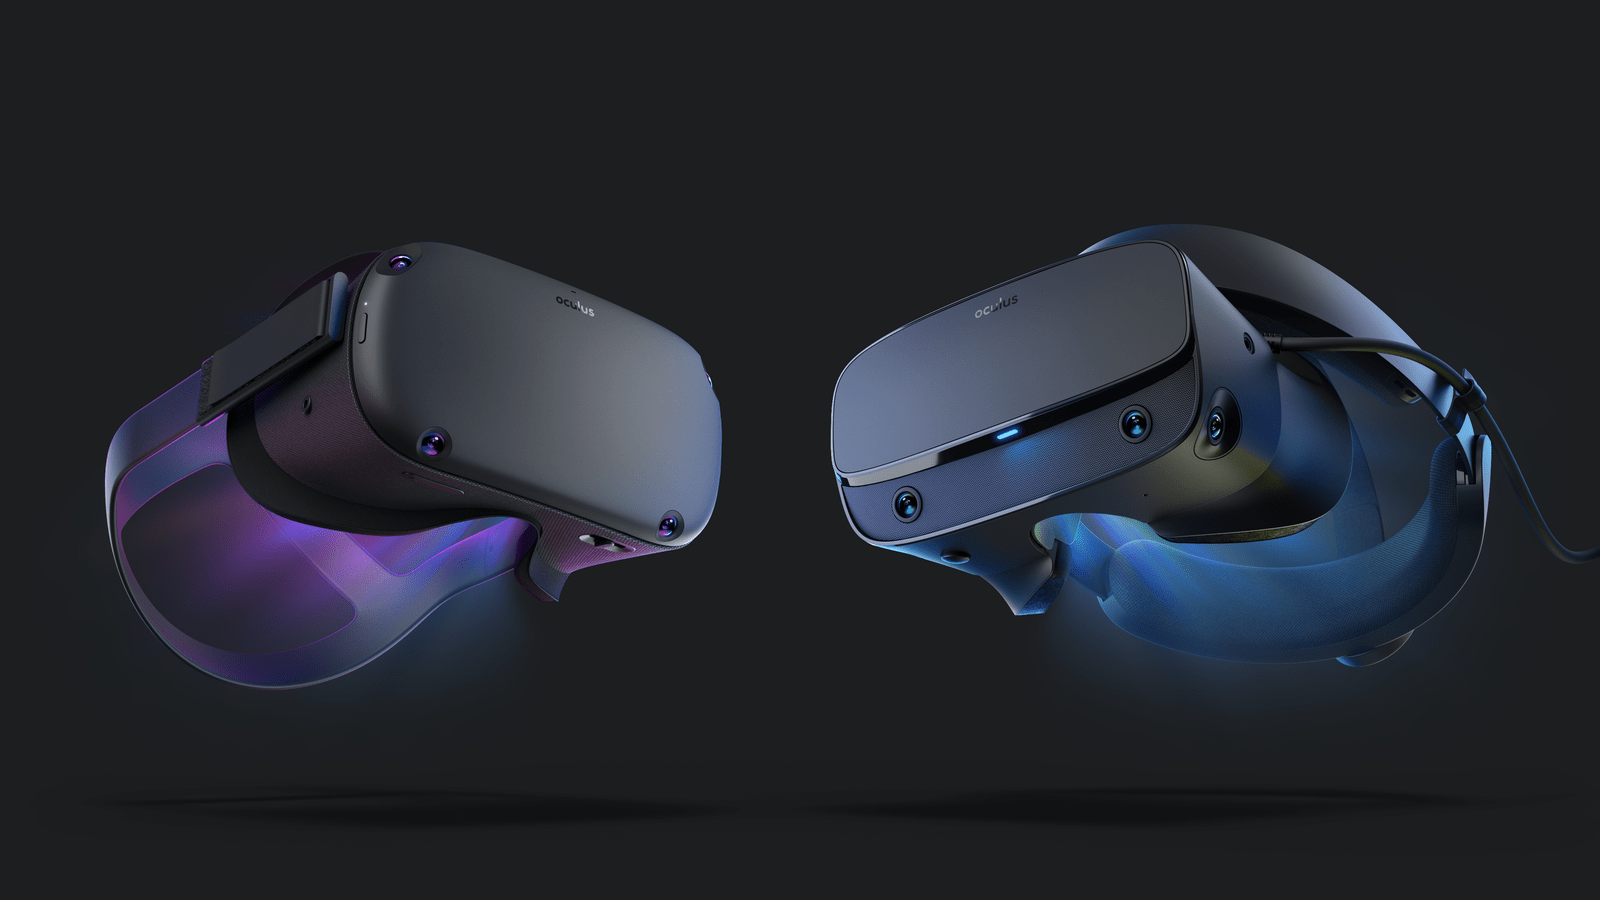 Oculus Quest and Rift S Potential in VR Esports